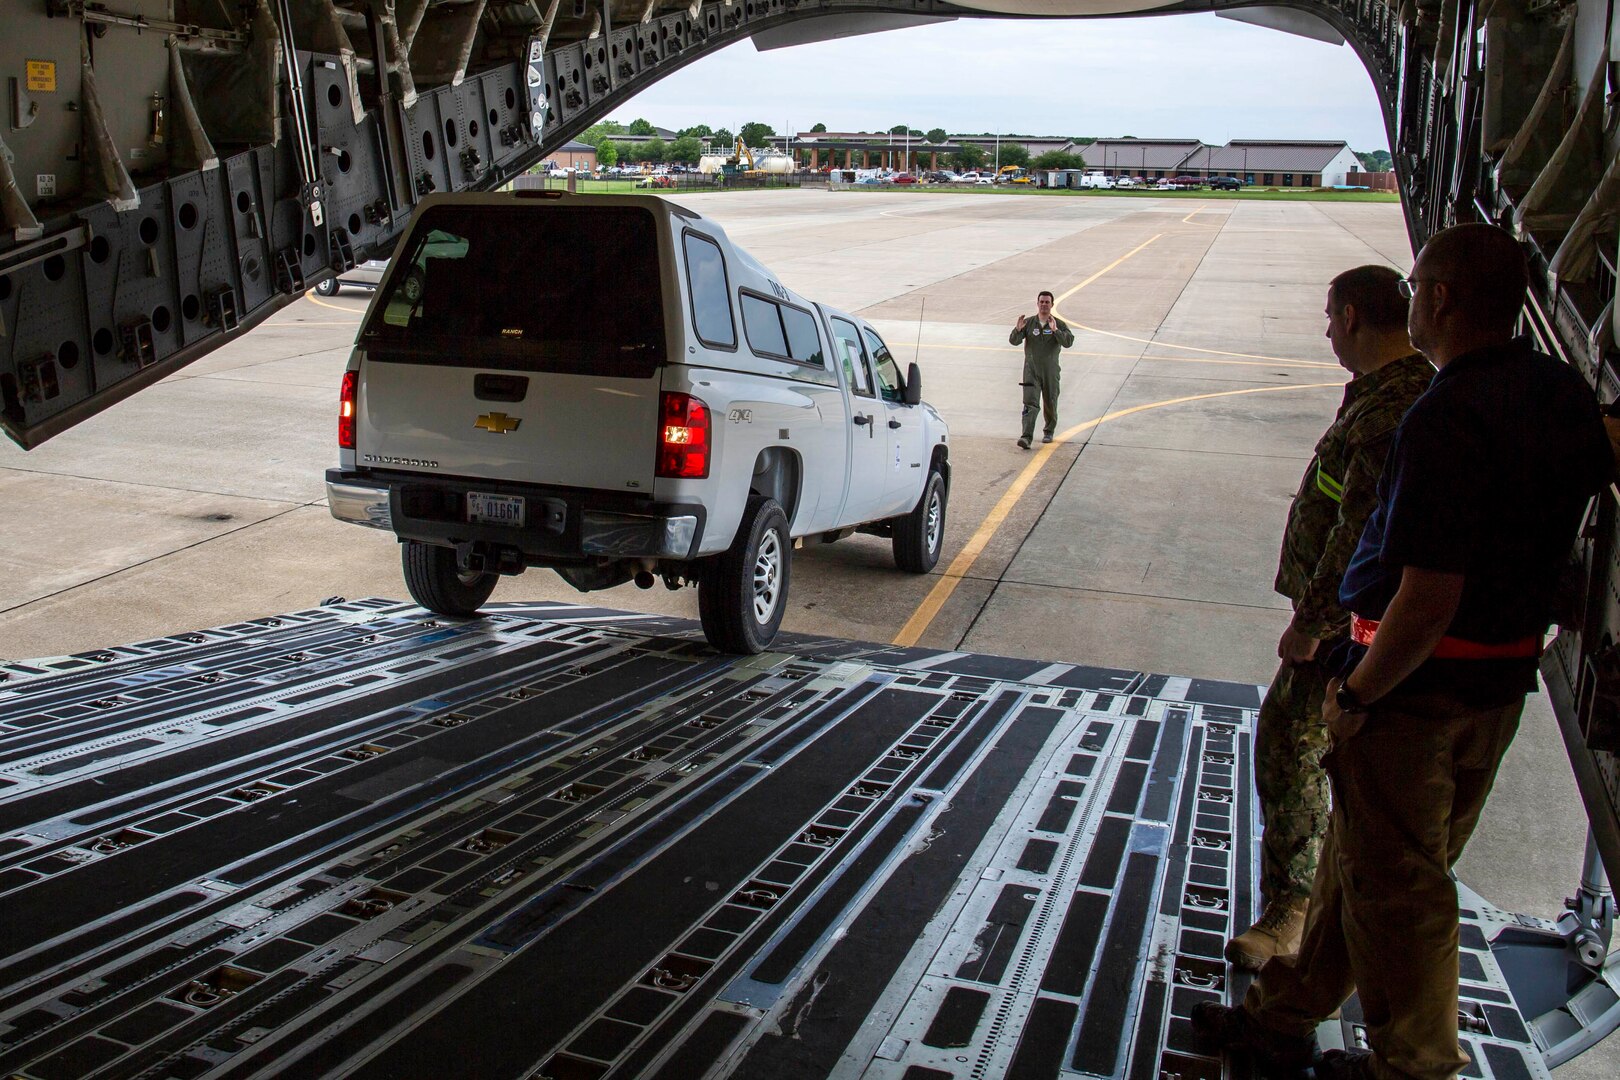 Members of Joint Task Force Civil Support (JTF-CS) and airmen from Langley Air Force Base load vehicles onto a Boeing C-17 Globemaster III during a no-notice Deployment Readiness Exercise (DRE). The purpose of the DRE was to test both commands ability to rapidly deploy during an incident. When directed, JTF-CS is ready to respond in 24 hours to provide command and control of 5,200 federal military forces located at more than 36 locations throughout the nation acting in support of civil authority response operations to save lives, prevent further injury, and provide critical support to enable community recover. (Official DoD photo by Mass Communication Specialist 3rd Class Michael Redd/released)